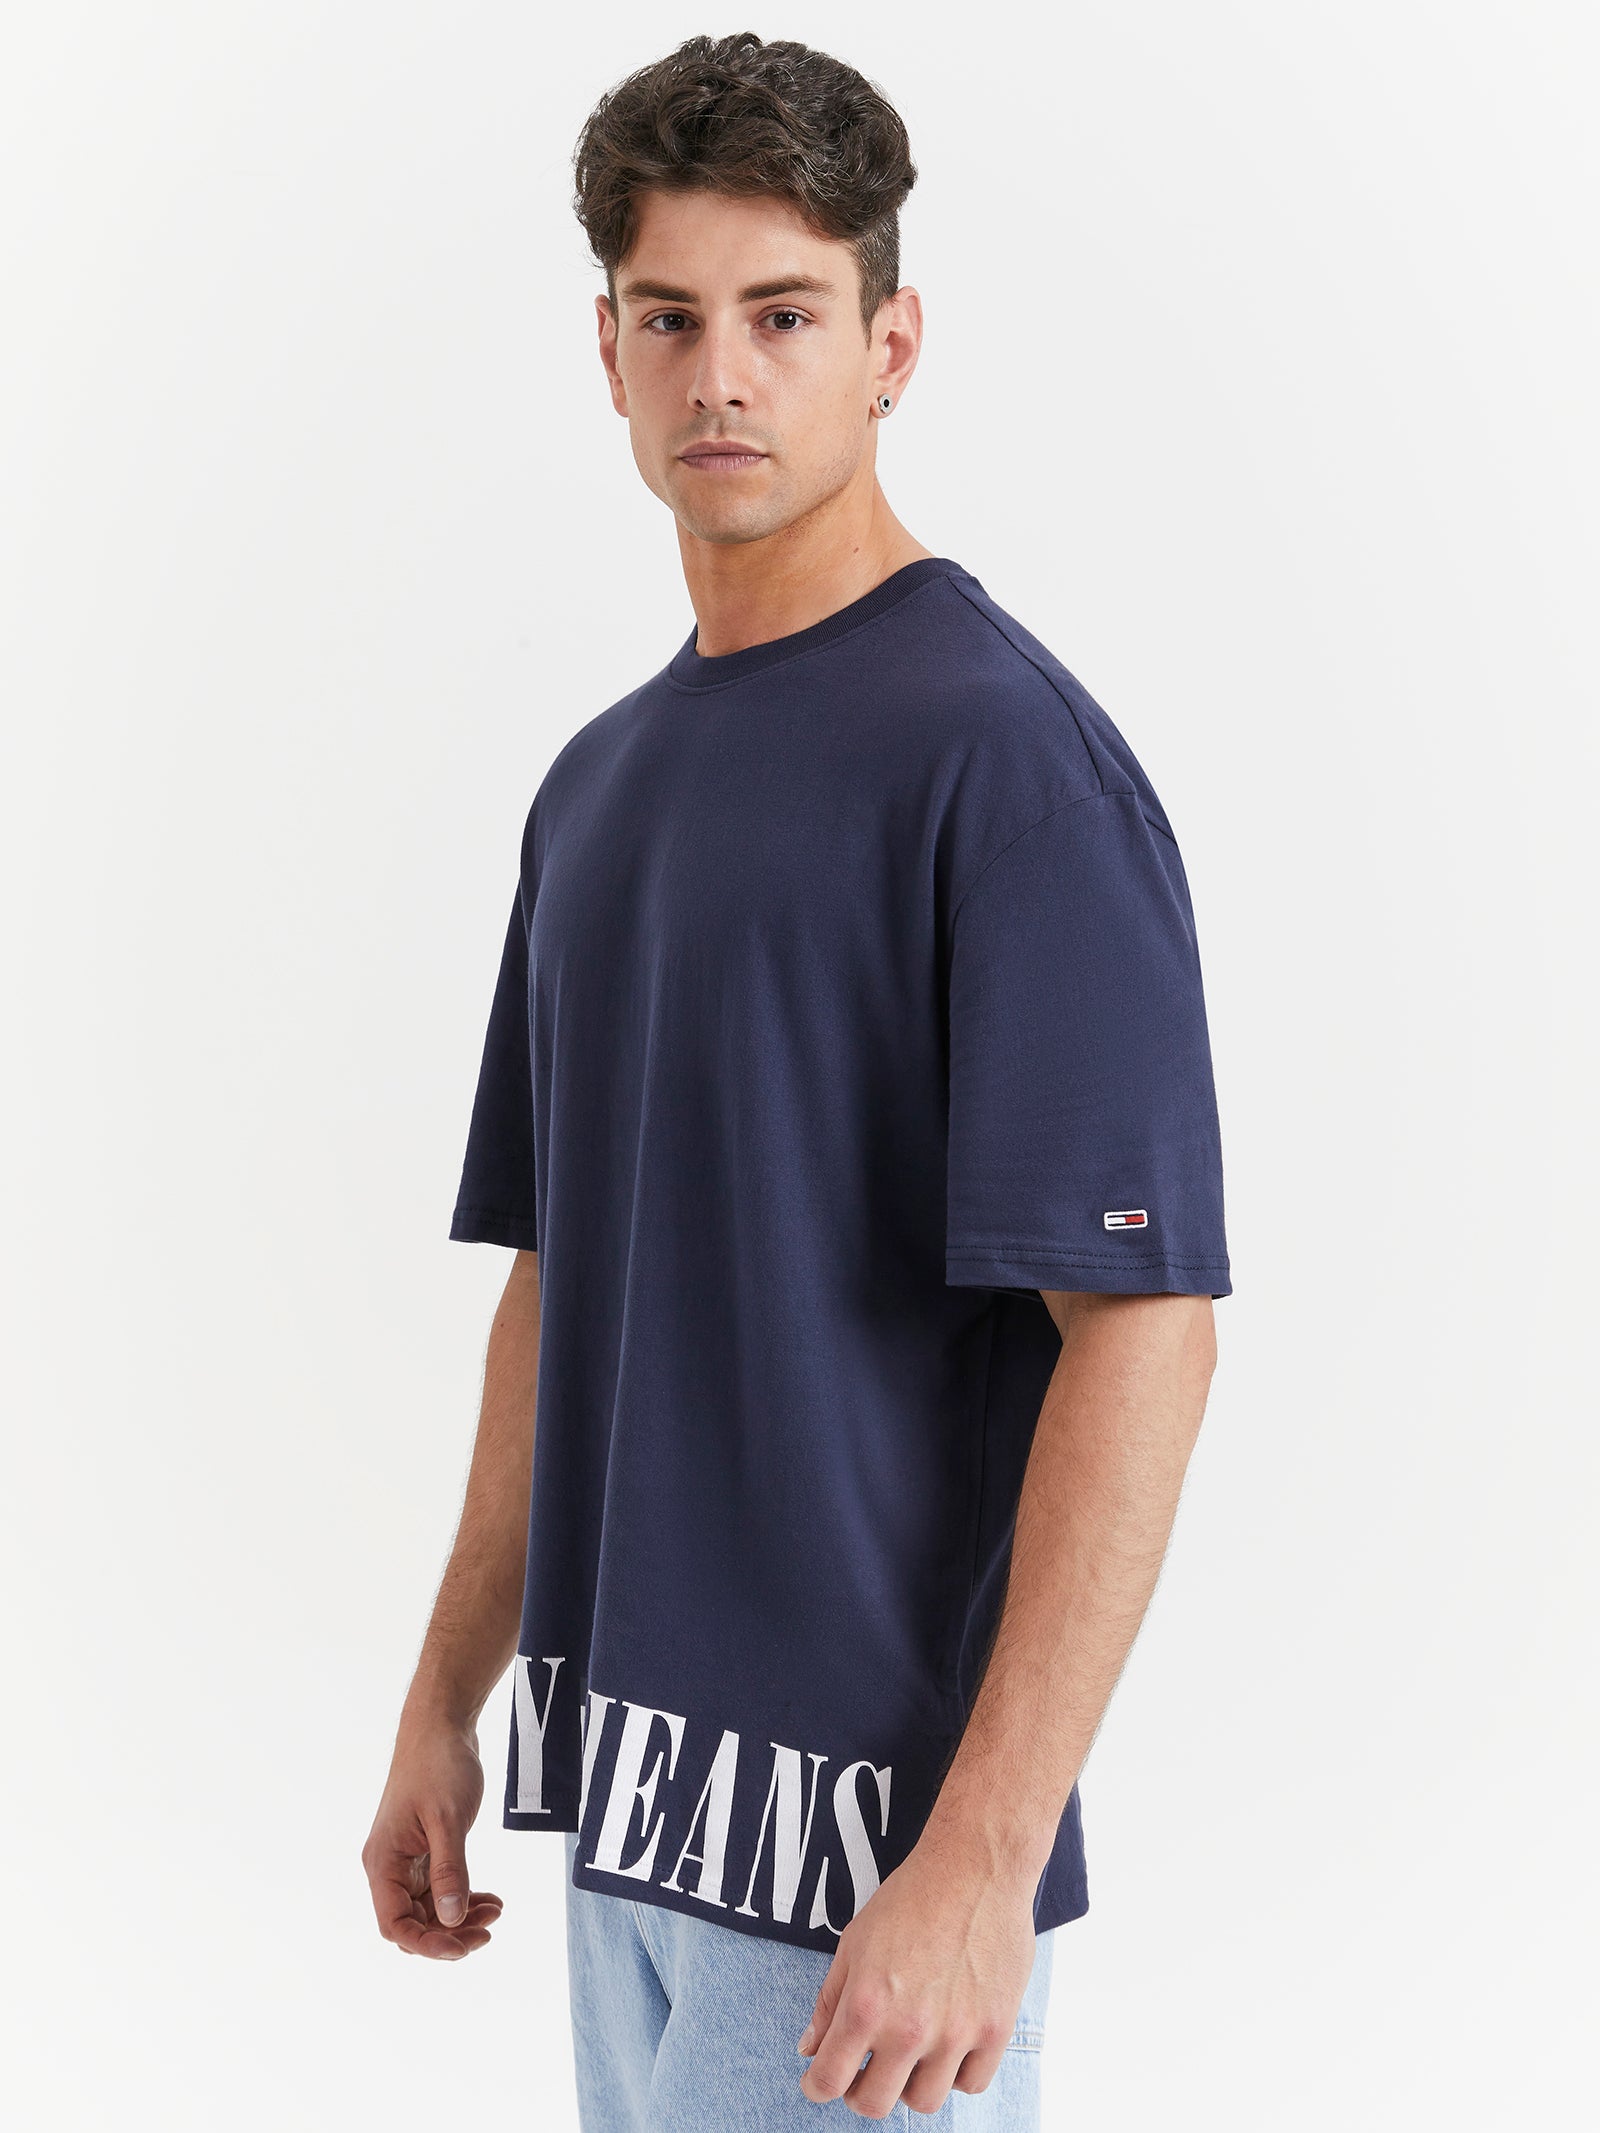 Graphic Oversized Fit T-Shirt in Navy